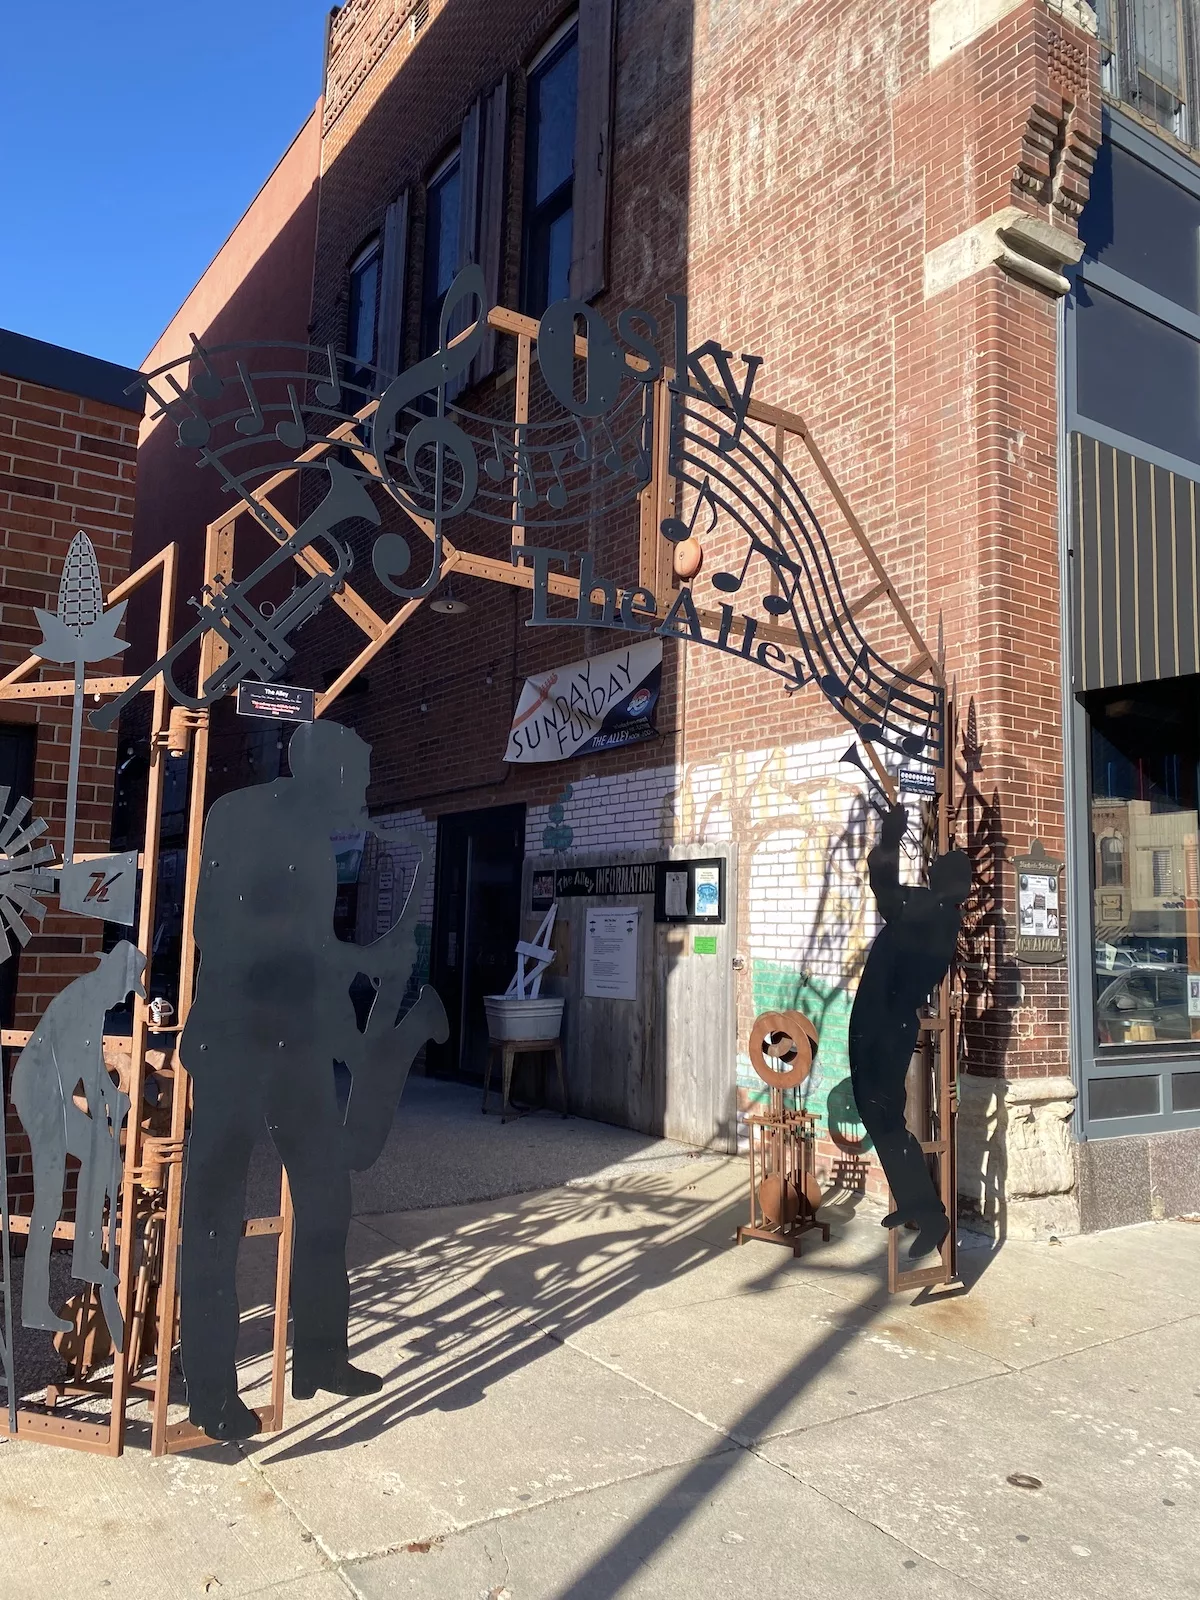 Metal signage for The Alley in Oskaloosa, Iowa